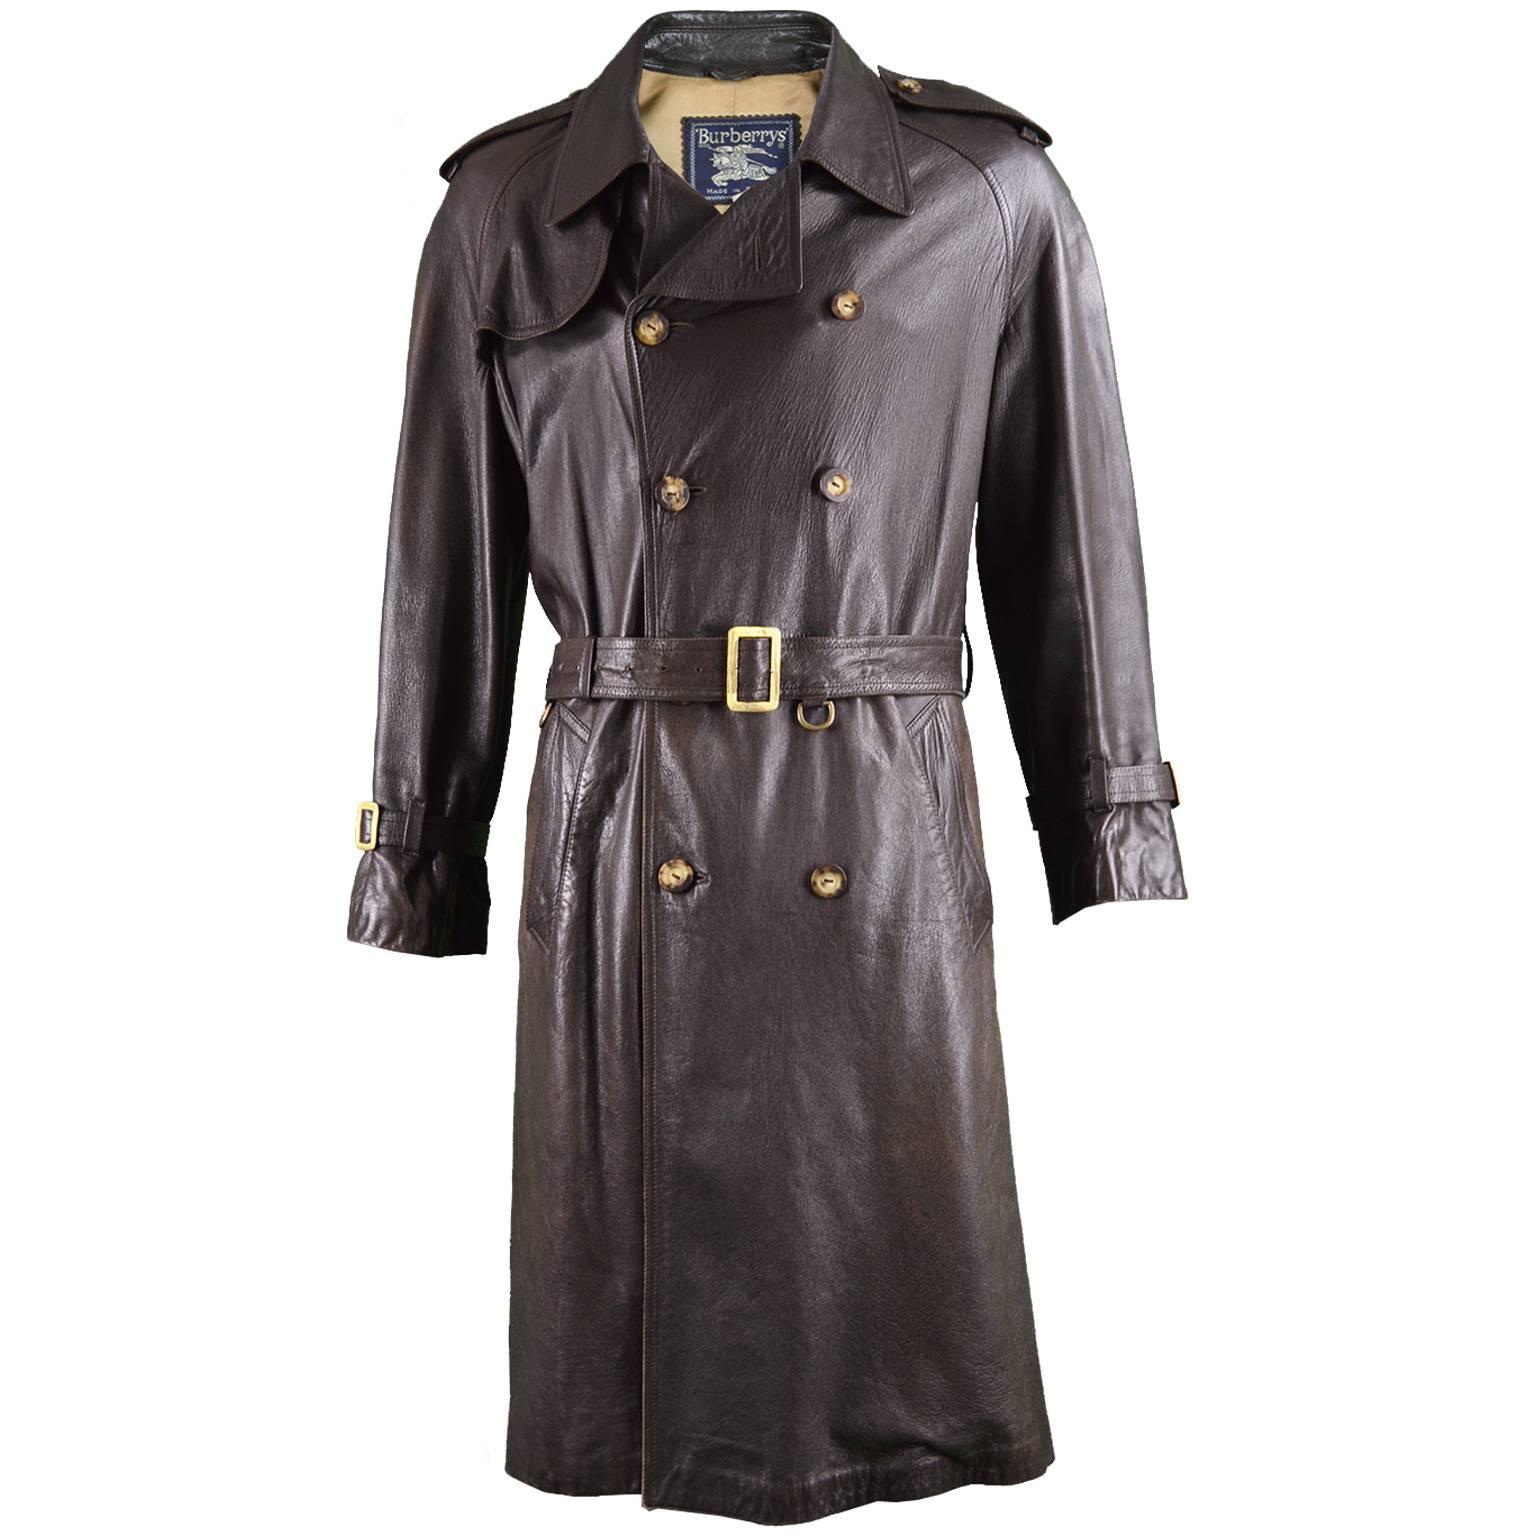 Burberry Men's Brown Leather Vintage Belted Trench Coat, 1960s